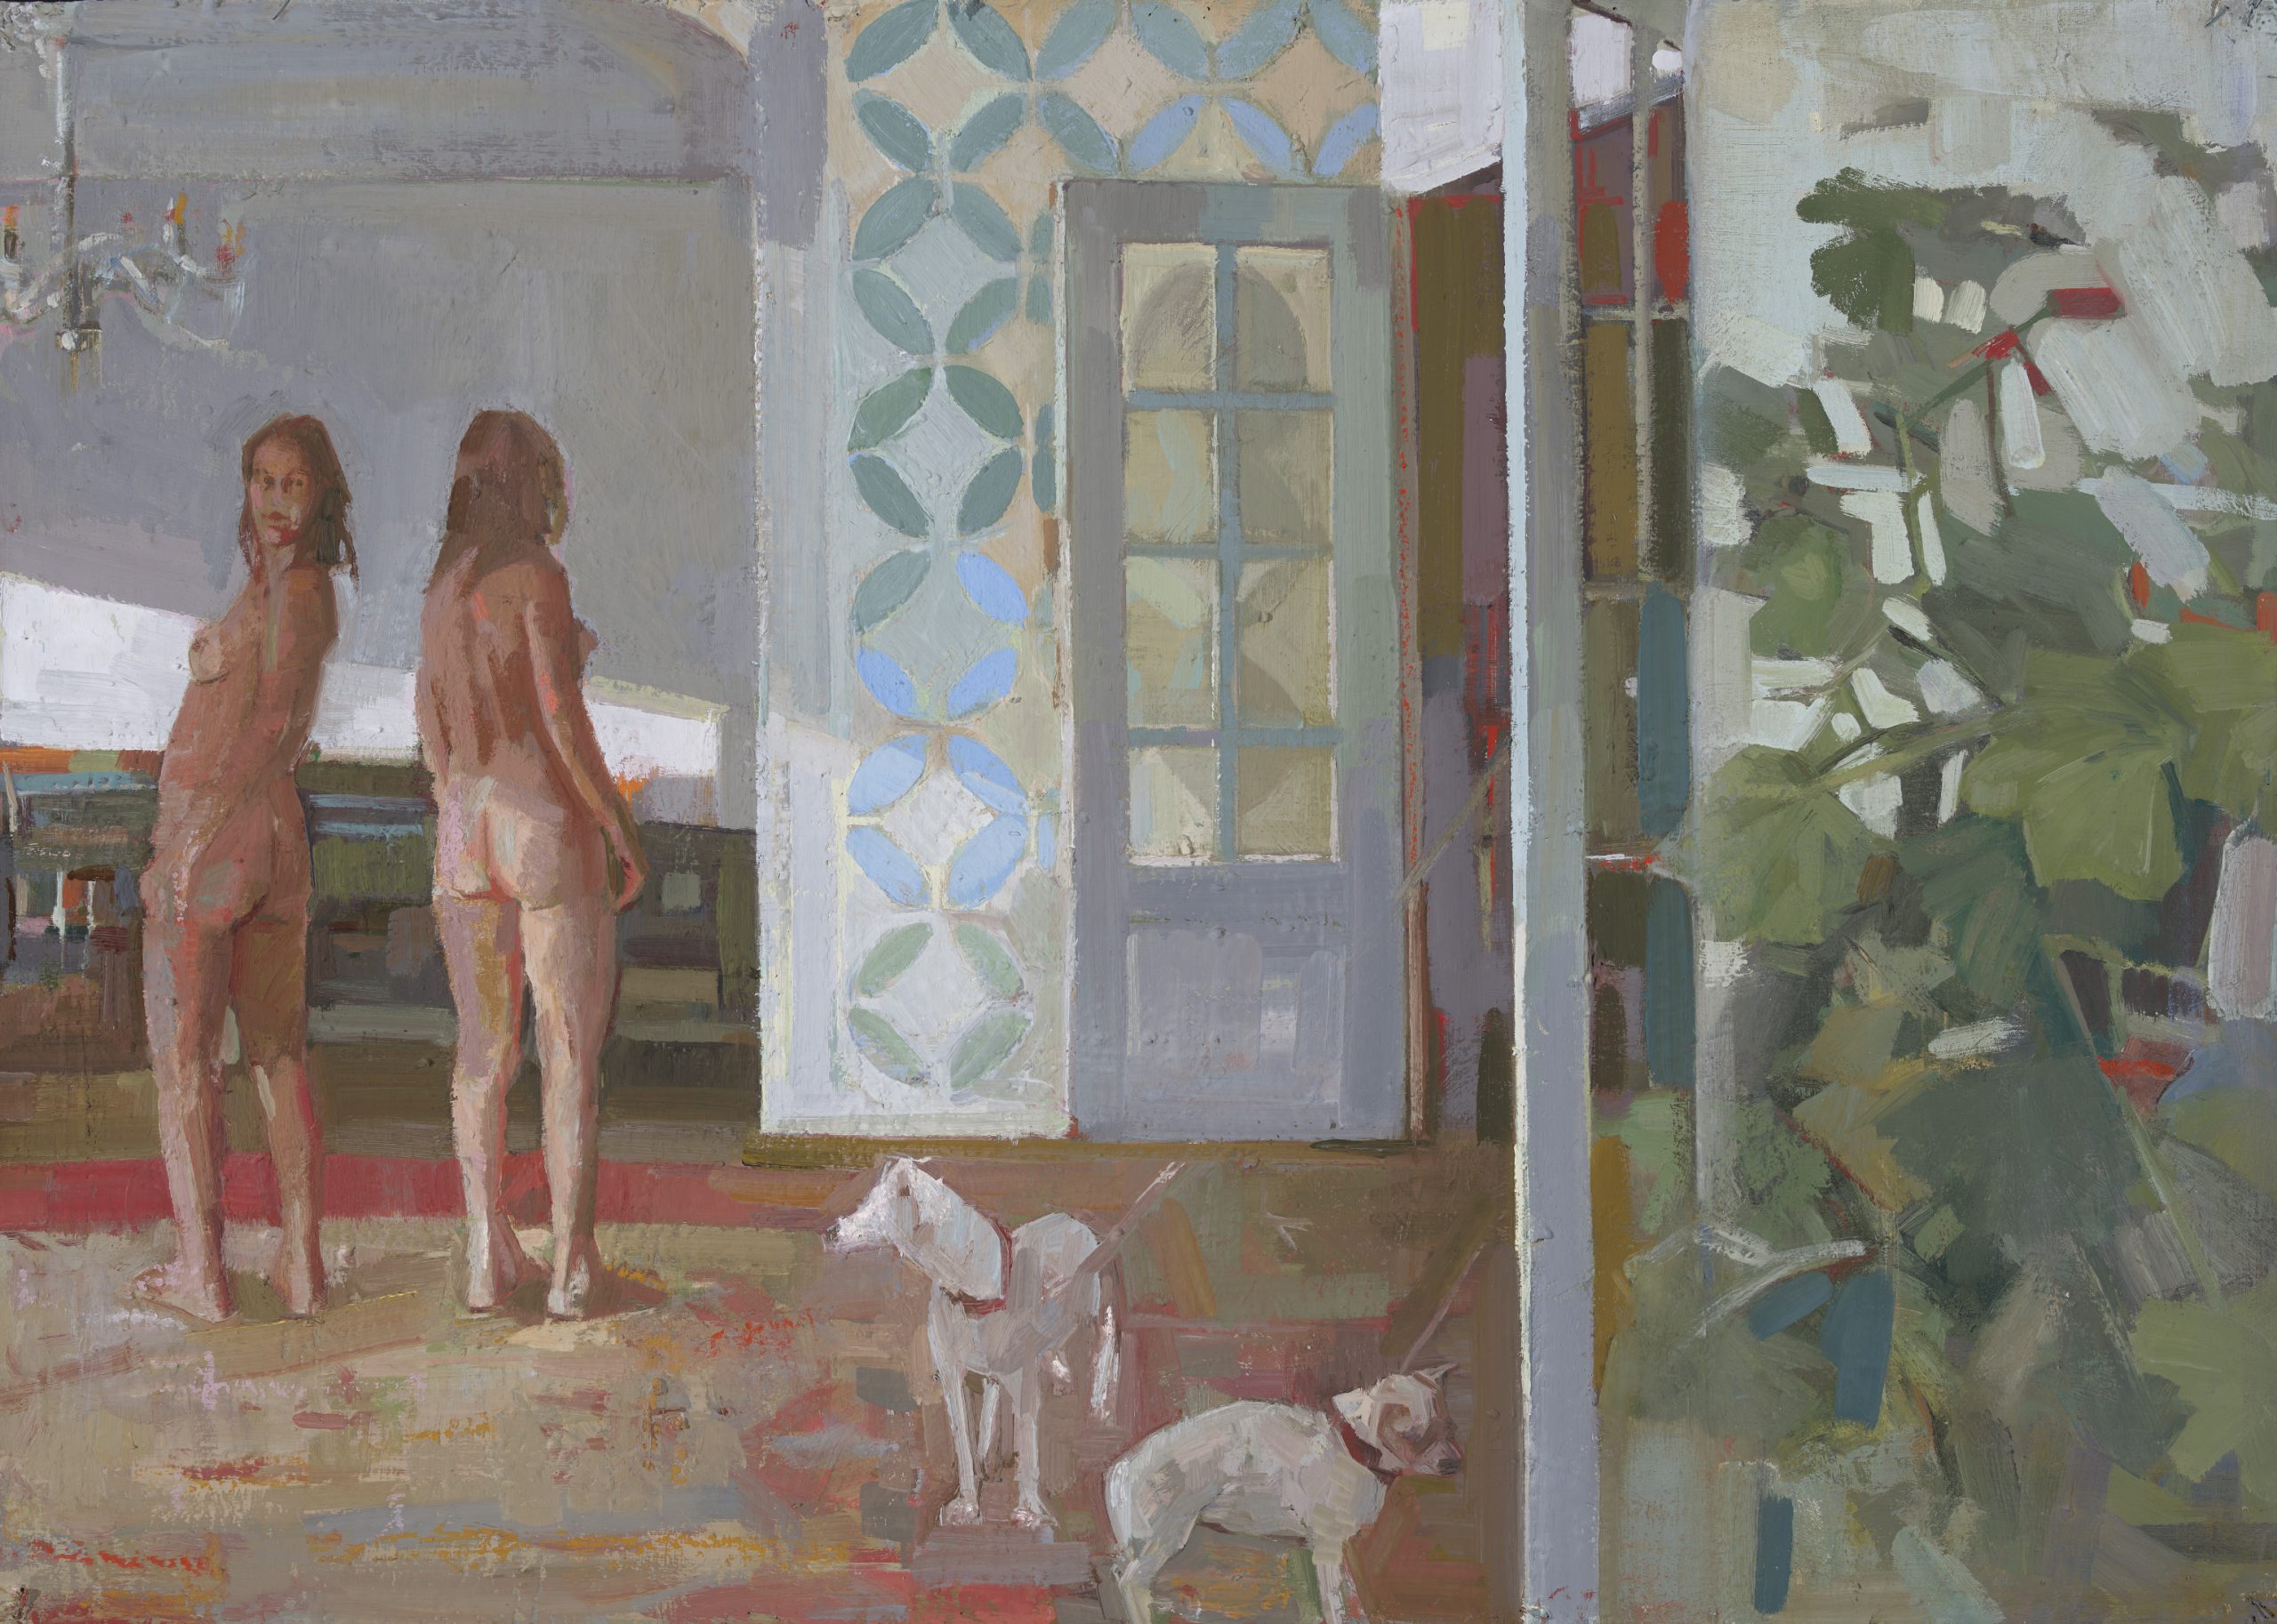 Dagmar Cyrulla ' Two Women and Two Dogs in a Room' 64 x 89cm oil on canvas paper on board $8000